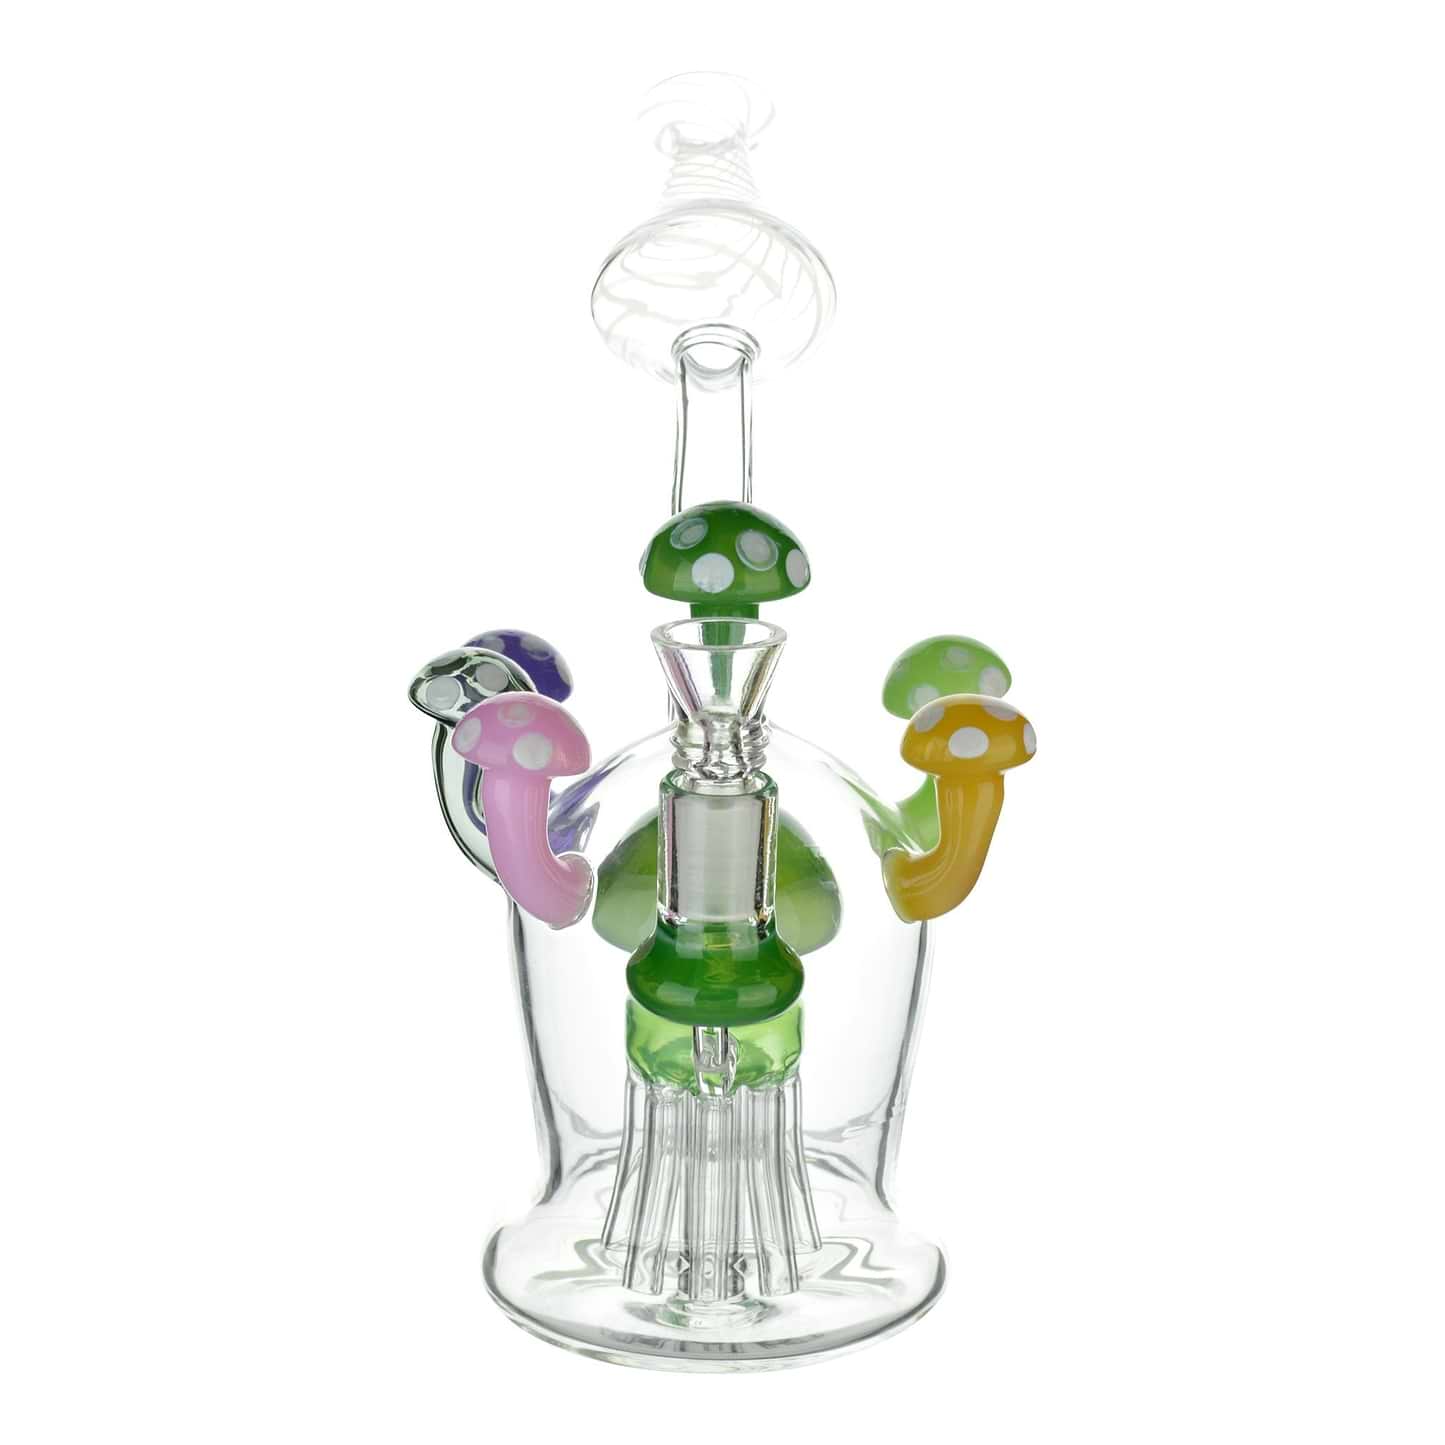 Full shot glass recycler dab rig color mushroom percs mouthpiece facing back bowl in front